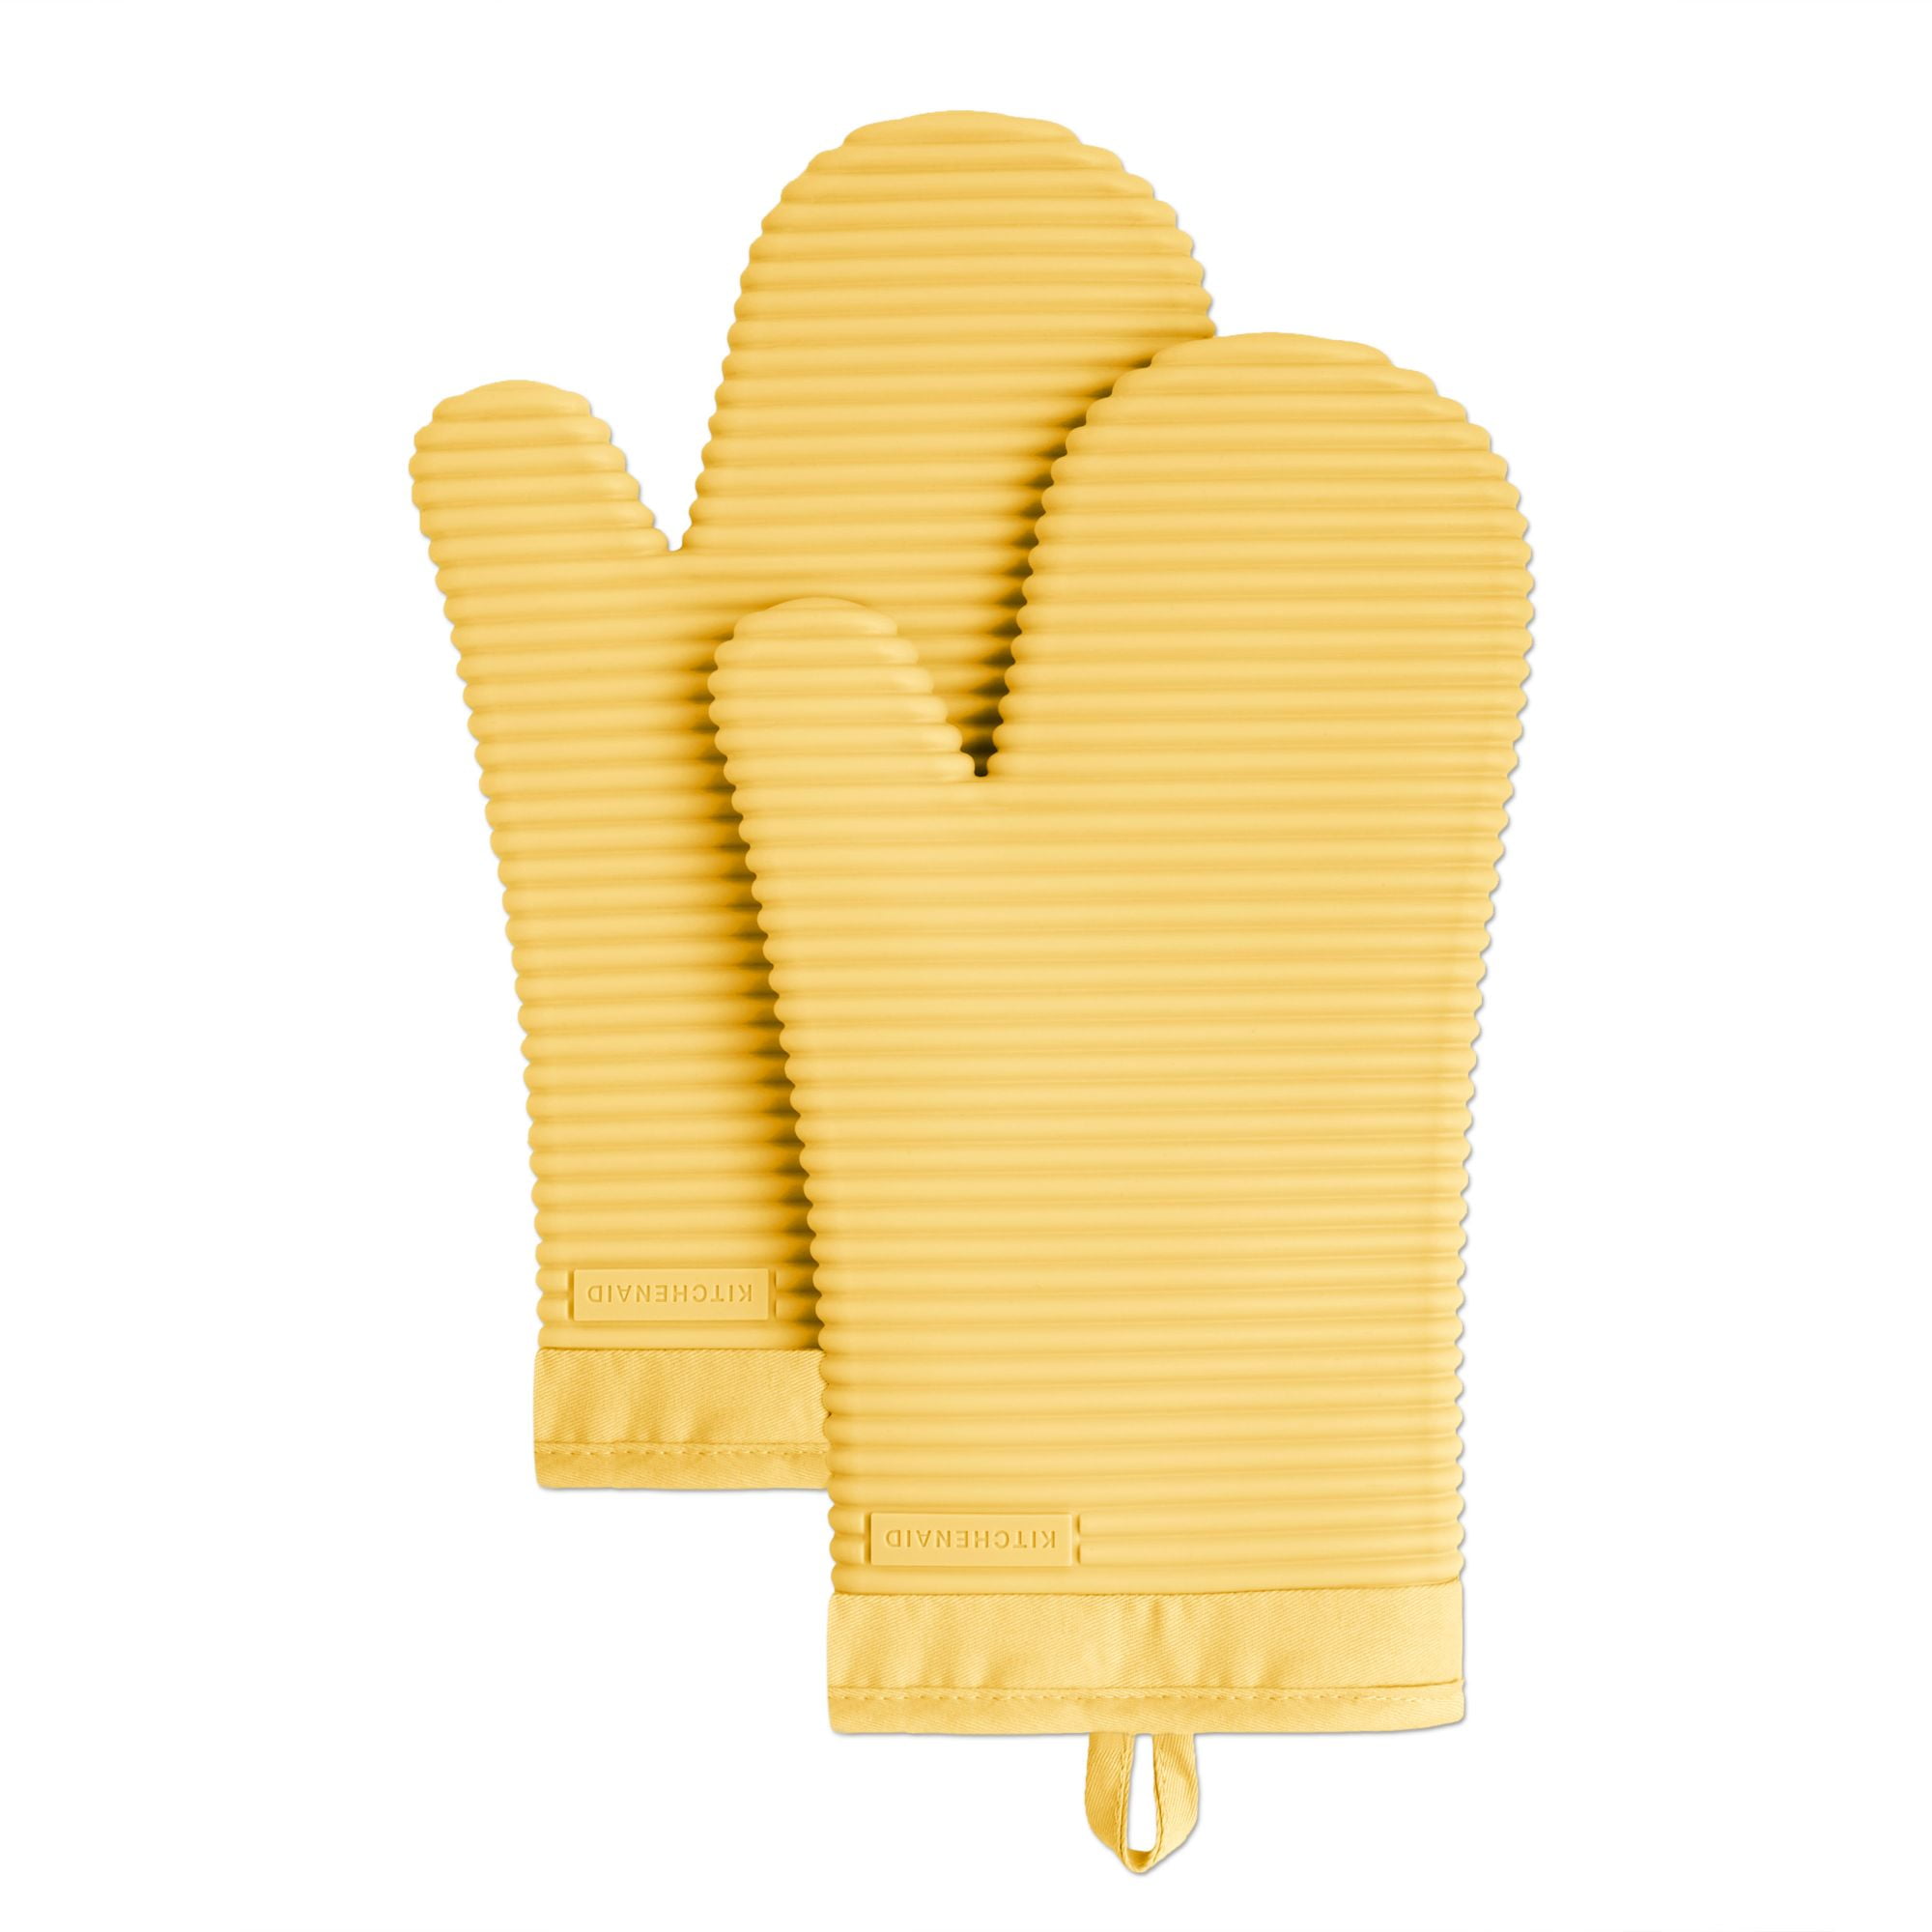 Choice 24 Terry Oven Mitts